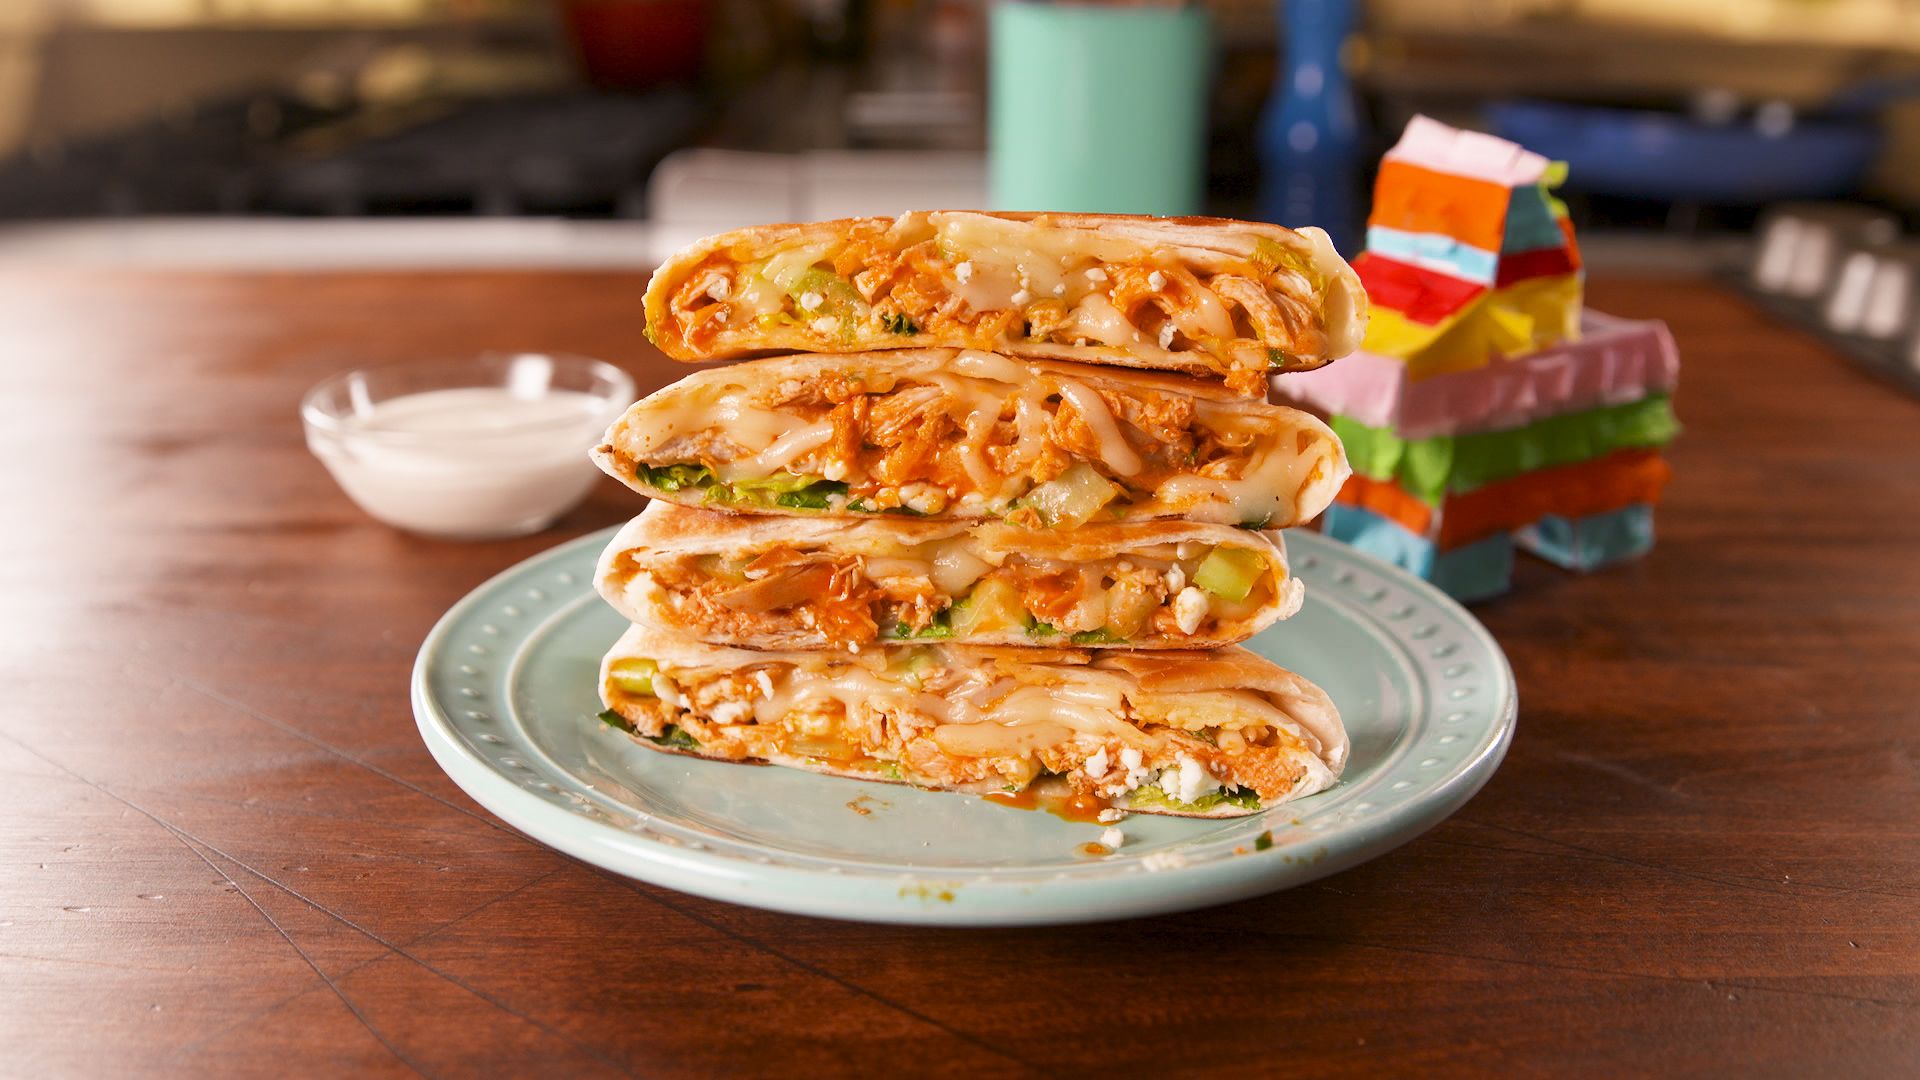 57 Twists On Buffalo Chicken That Demand Your Attention